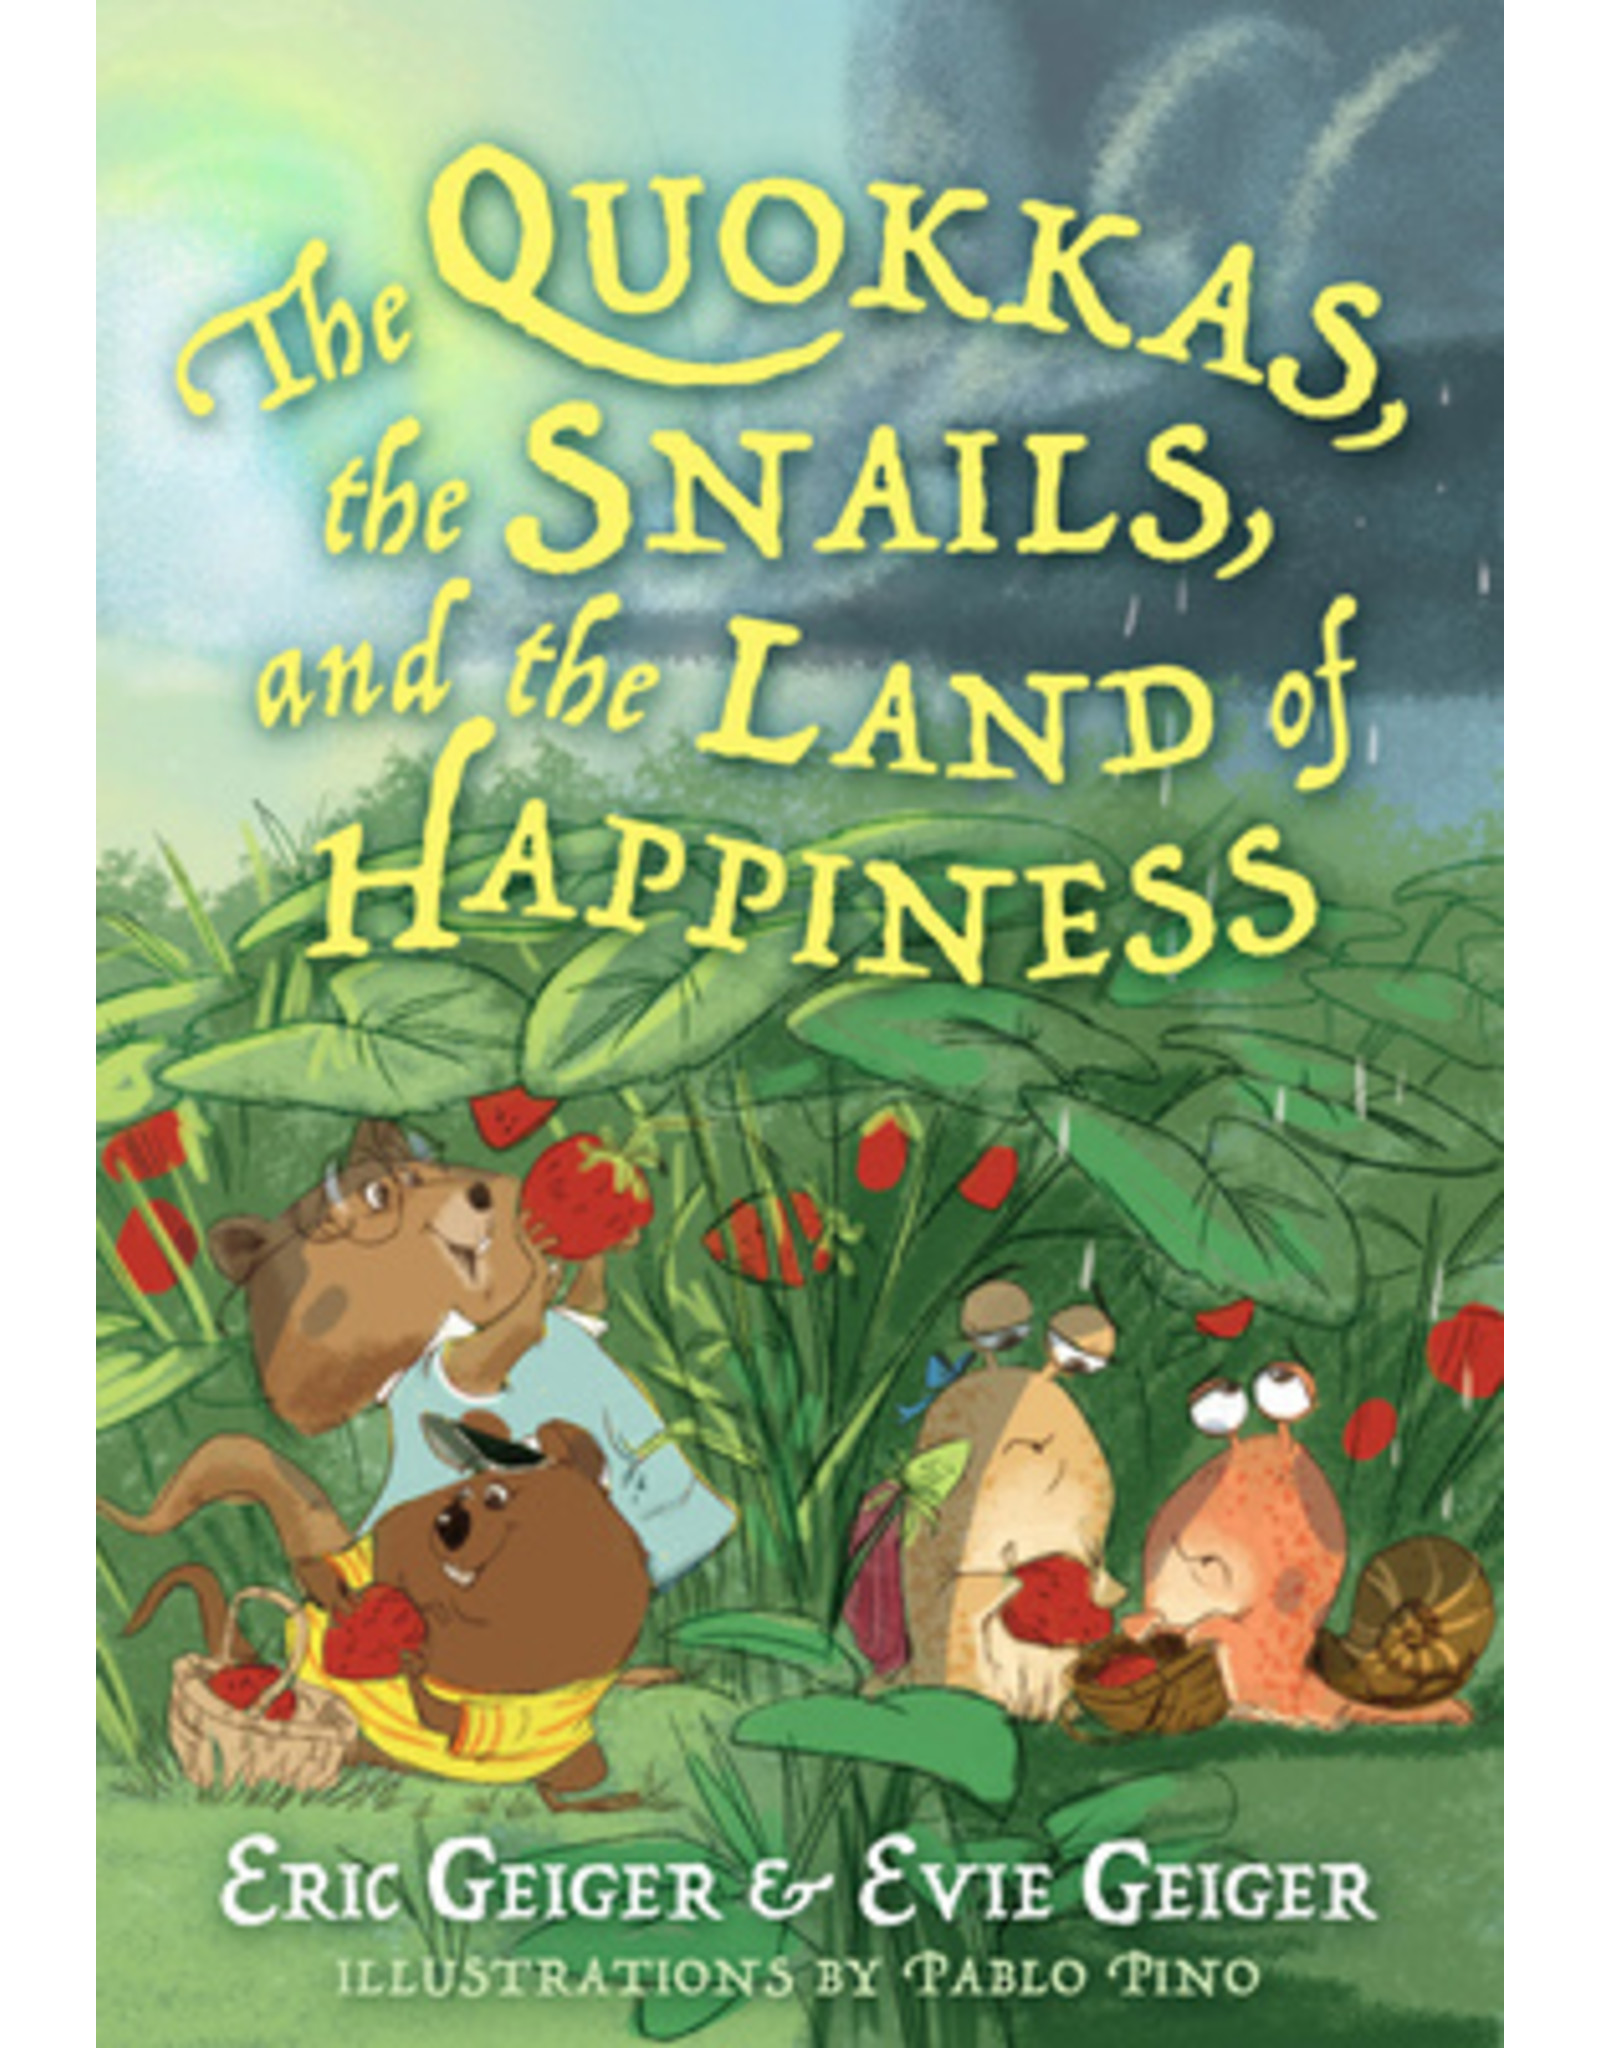 Eric & Evie Geiser The Quokkas, the snails, and the land of happiness